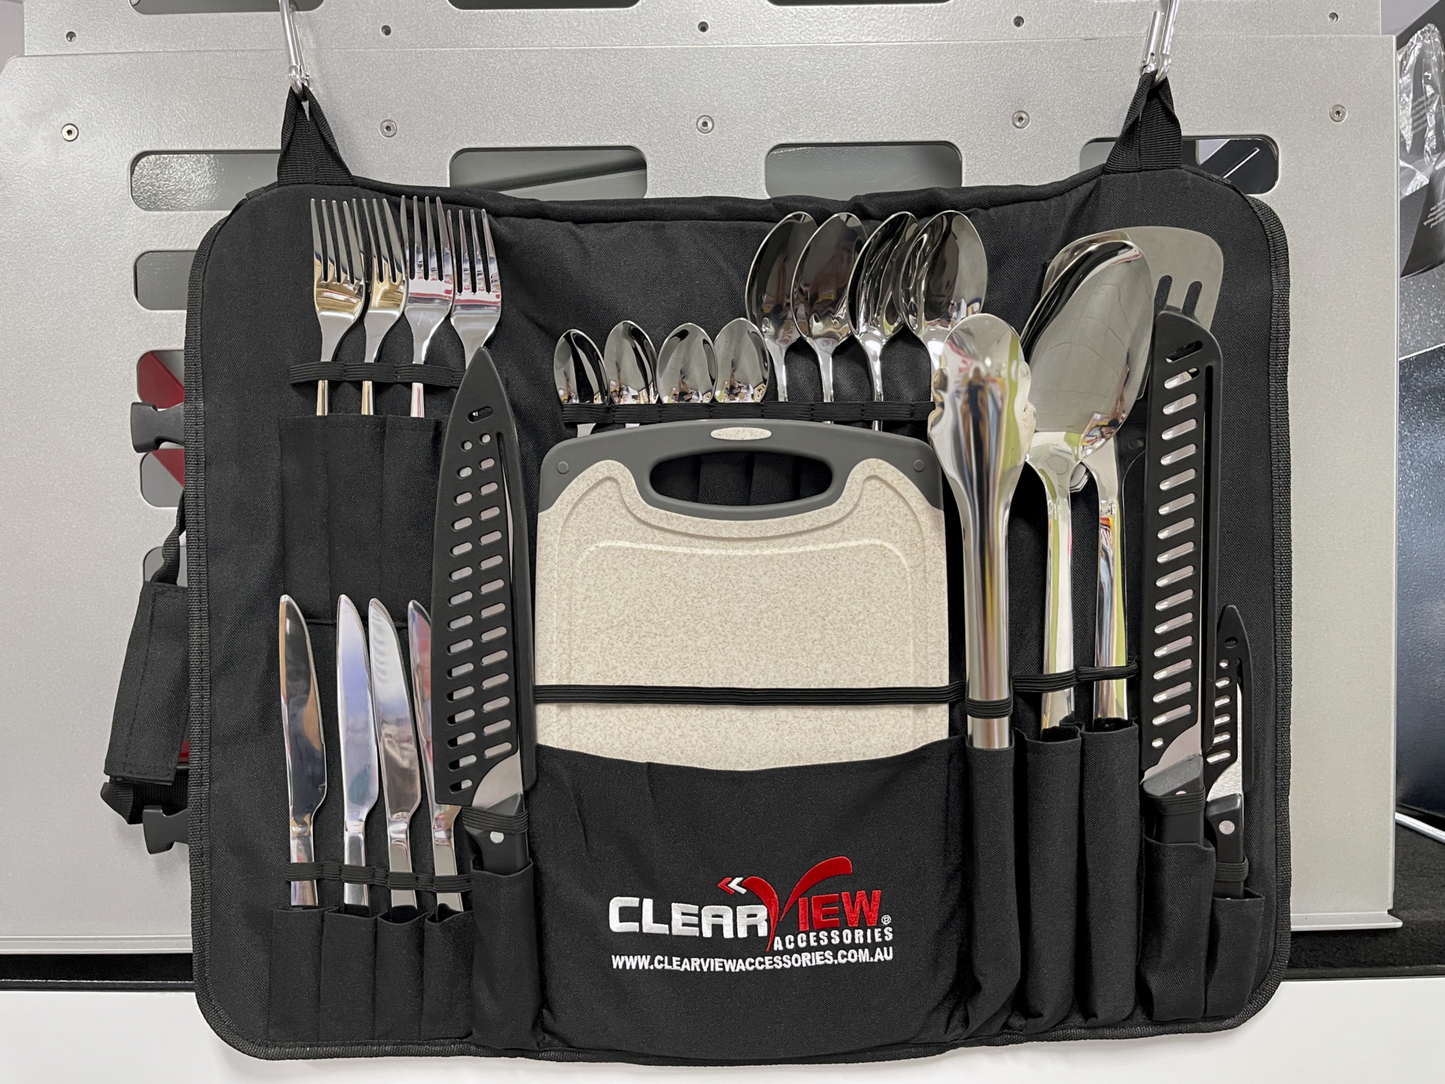 Clearview Cutlery Set (CUT-01)